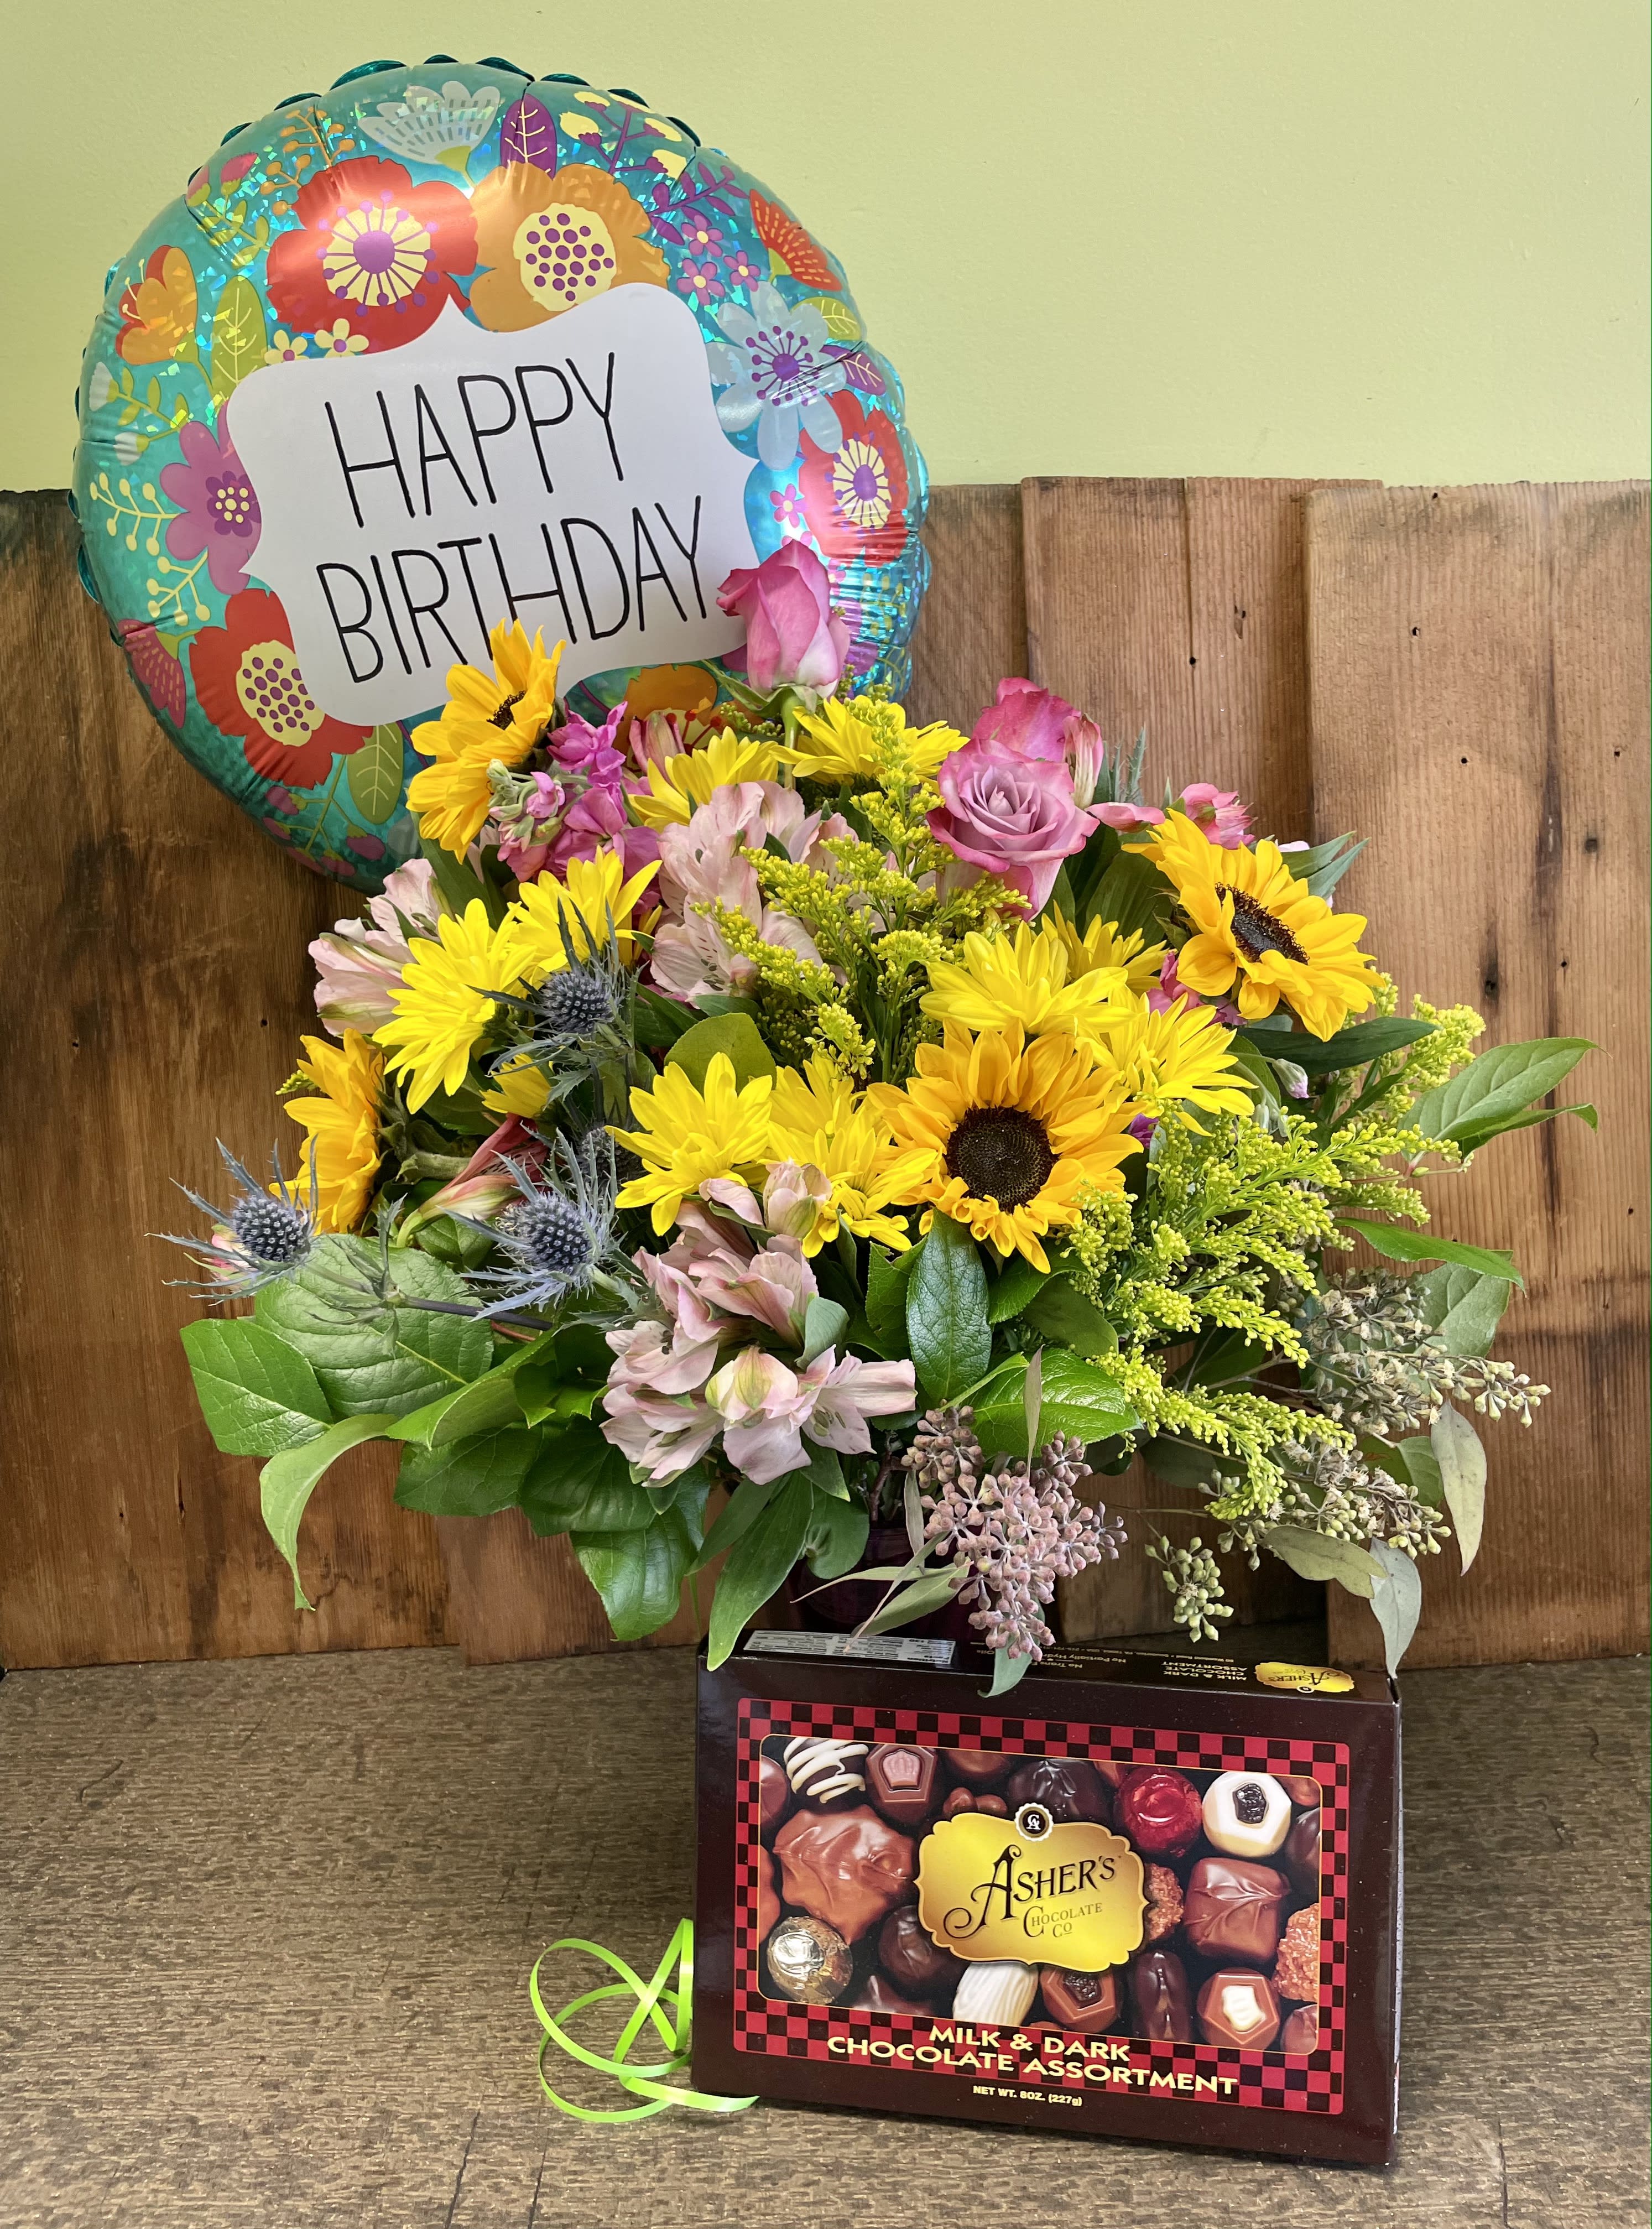 Happy Birthday Bundle - Celebrate someone special on their special day!! Festive fresh flower vase combines with a mixed box of chocolates and a festive mylar balloon to really spoil the recipient! Regular shown. Upgrades are to flowers. All choices include one mylar and one 8 oz. box of chocolates. Vase and balloon will coordinate and reflect the season and gender of recipient. Photo shows general look and feel of a typical, seasonal birthday vase. Specify preferences in special instructions if necessary.